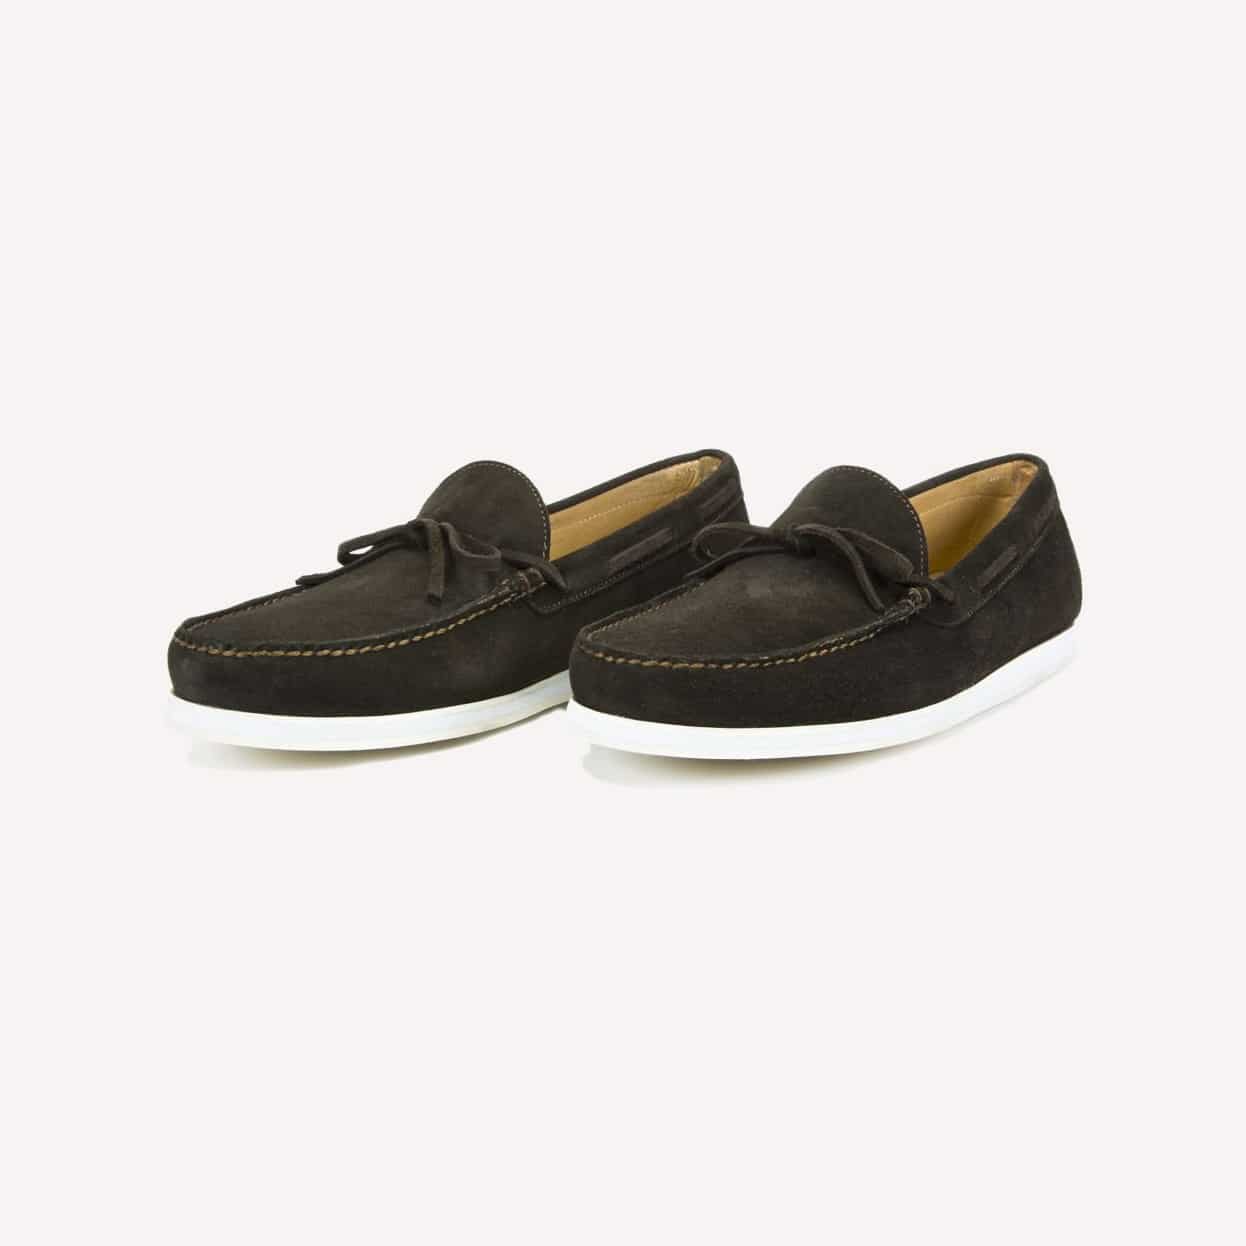 Jay Butler Dark Brown Suede Leather Naples Driving Loafer